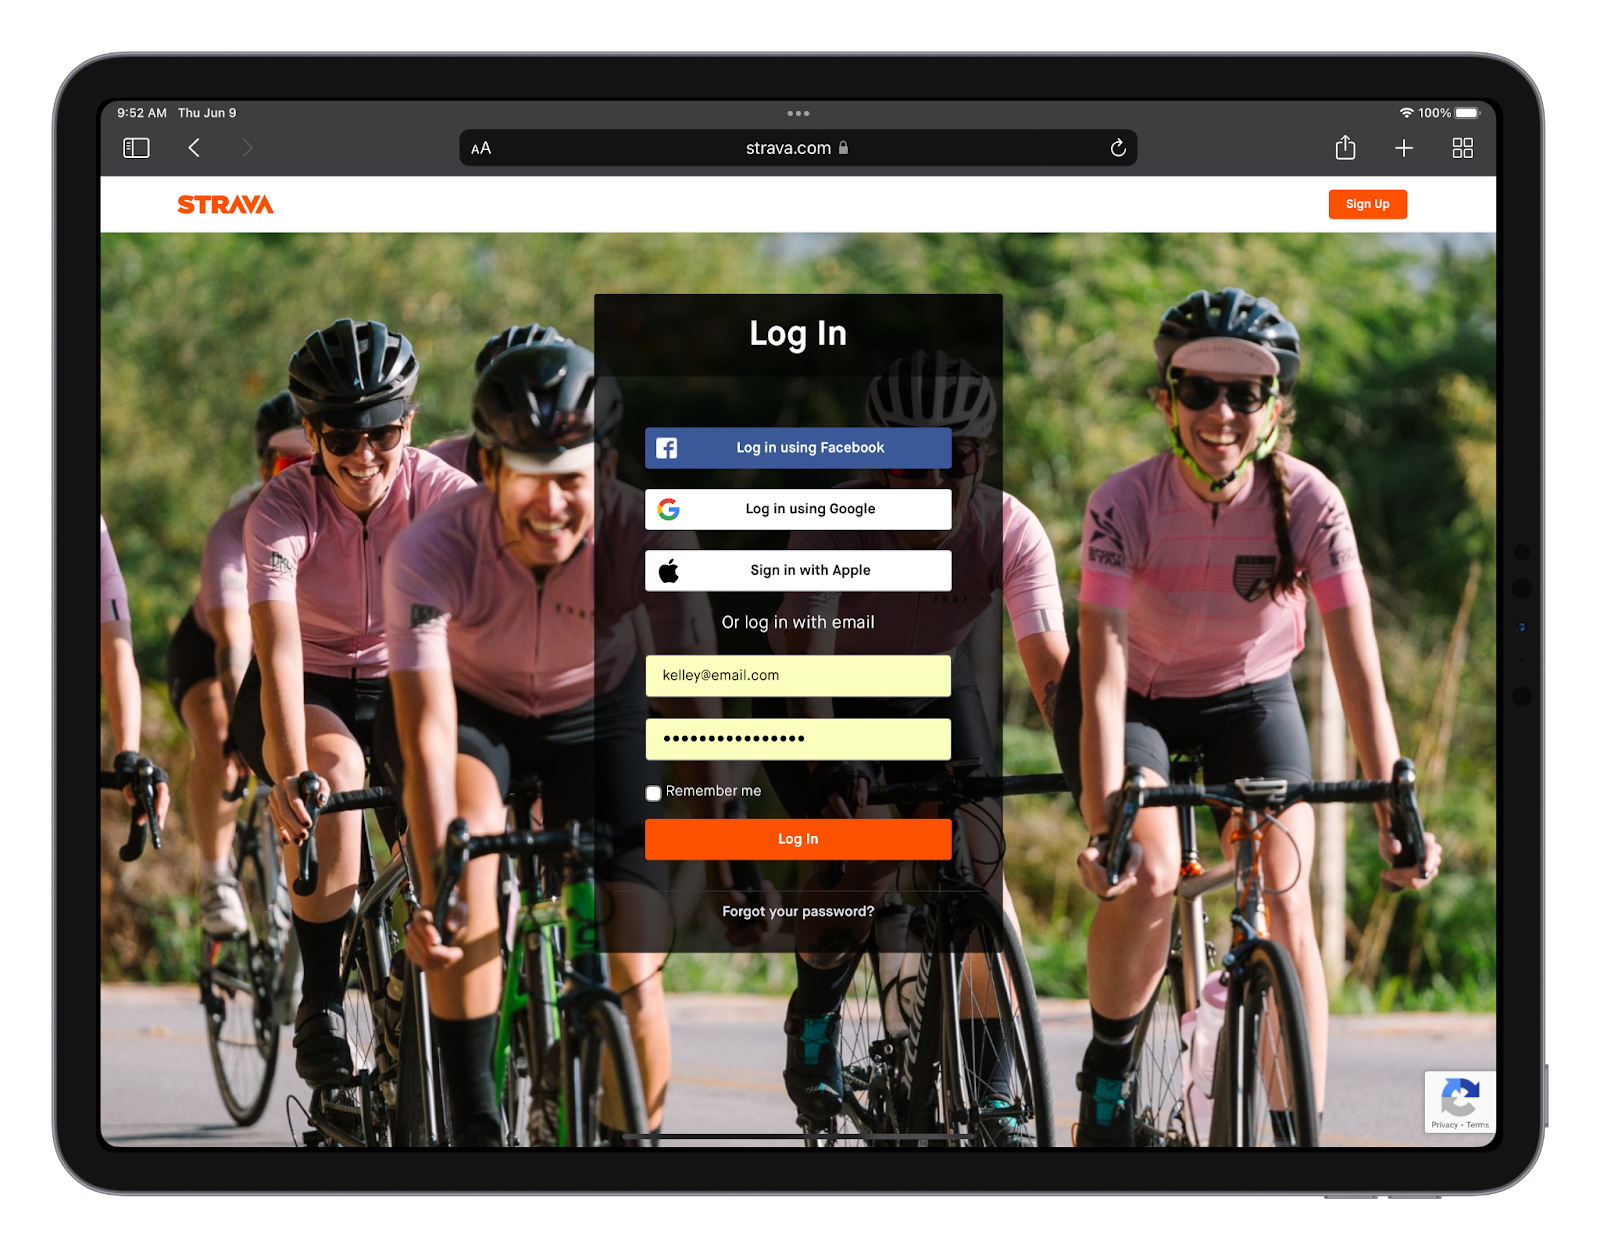 A Safari window shows the login screen for Strava. There's a dropdown allowing the user to click and AutoFill their login and password credentials.